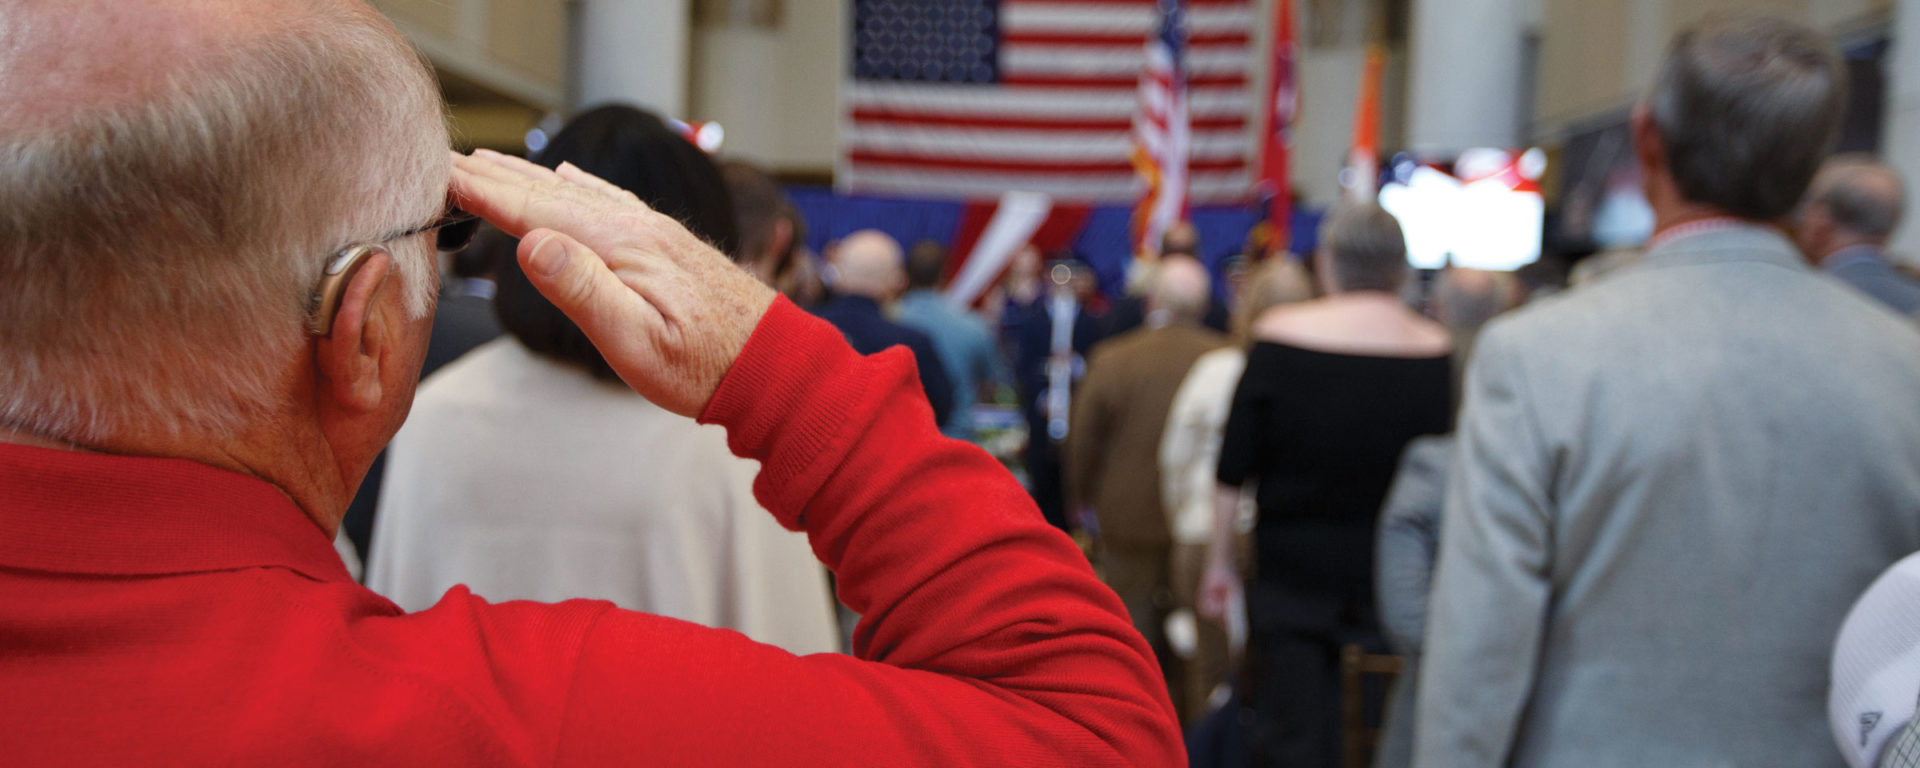 An attendee of the grand opening of the UT Knoxville Veterans Resource Center salutes the flag.